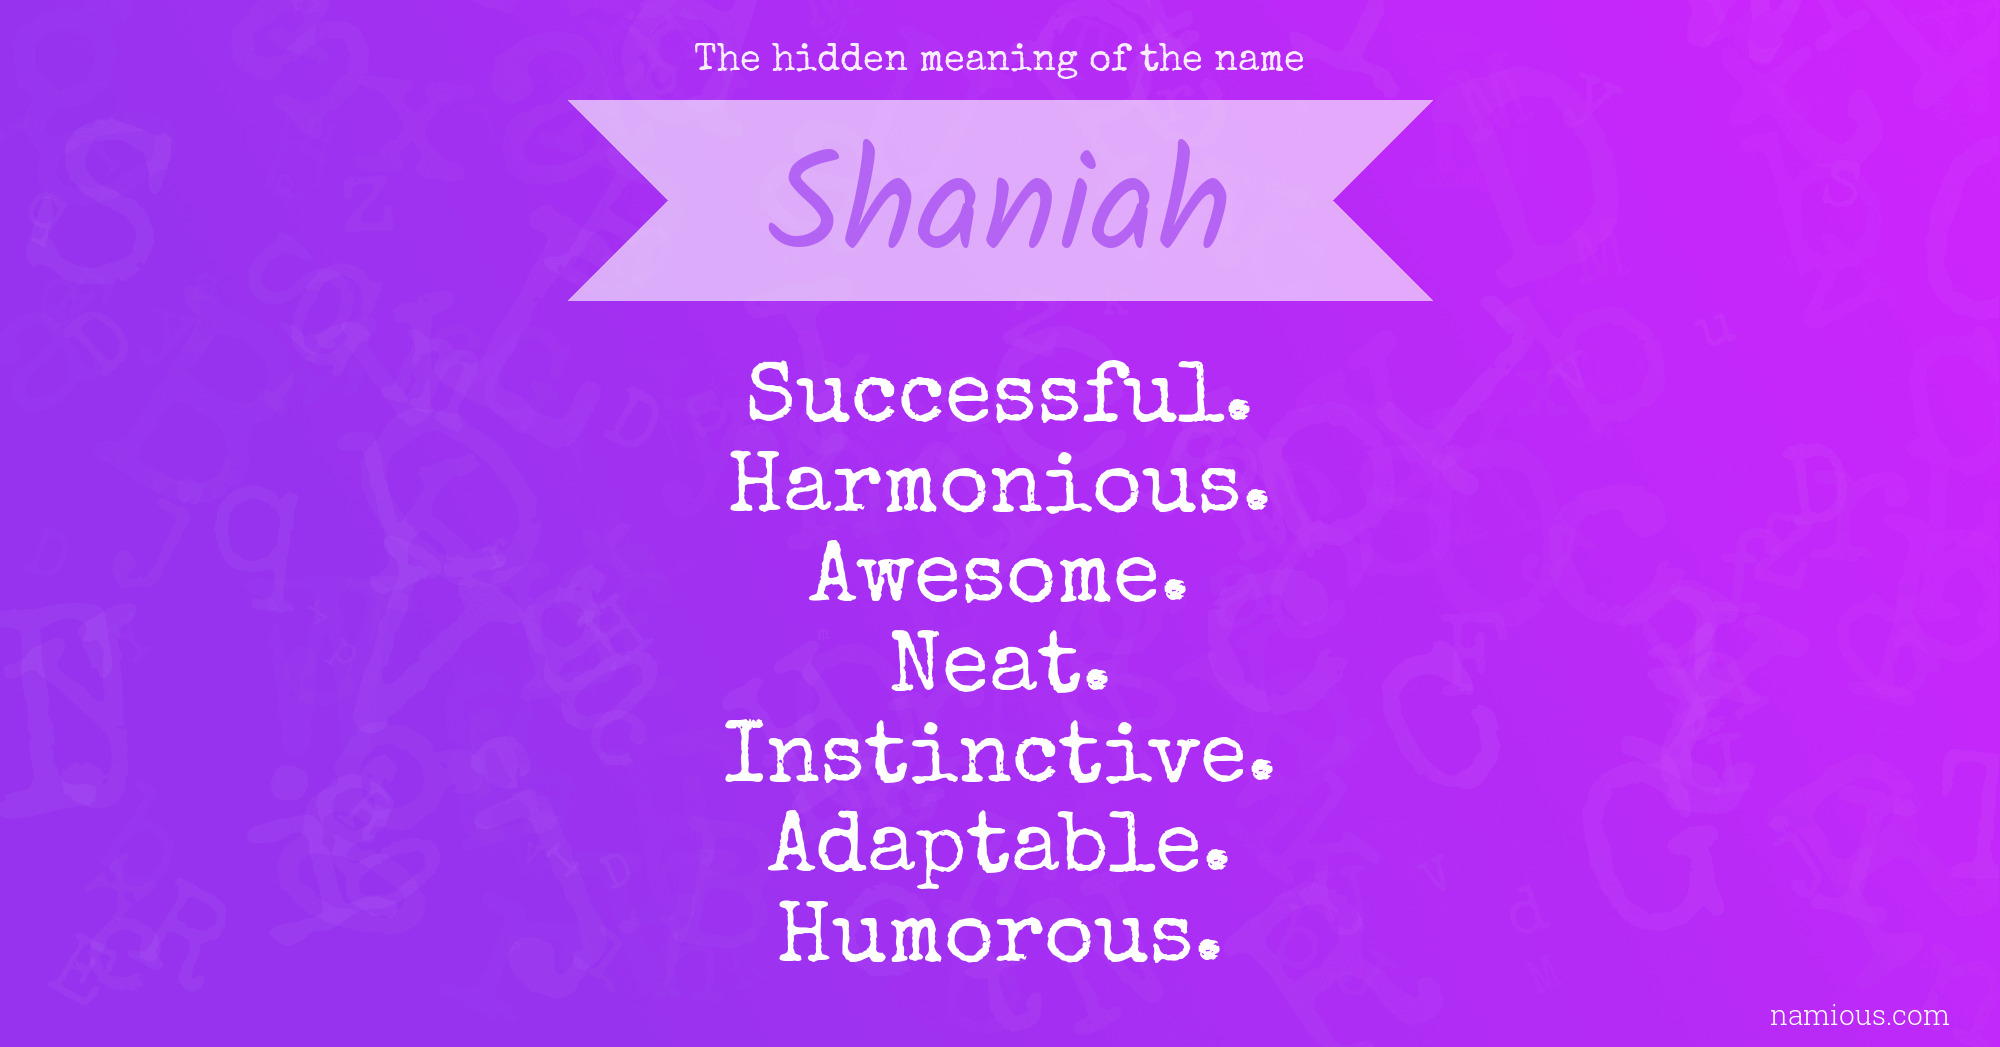 The hidden meaning of the name Shaniah